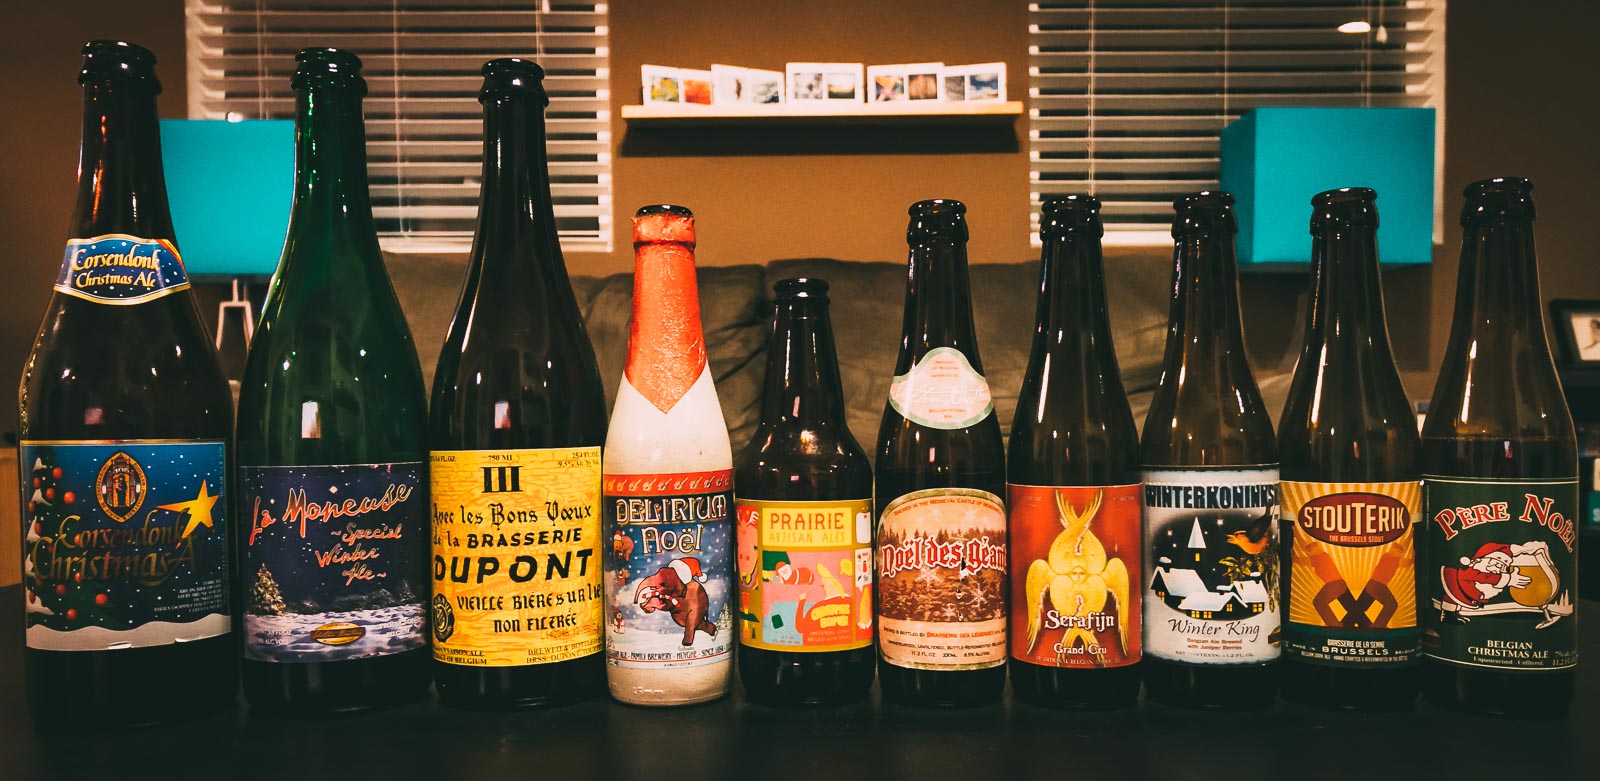 The 2016 Holiday Beers